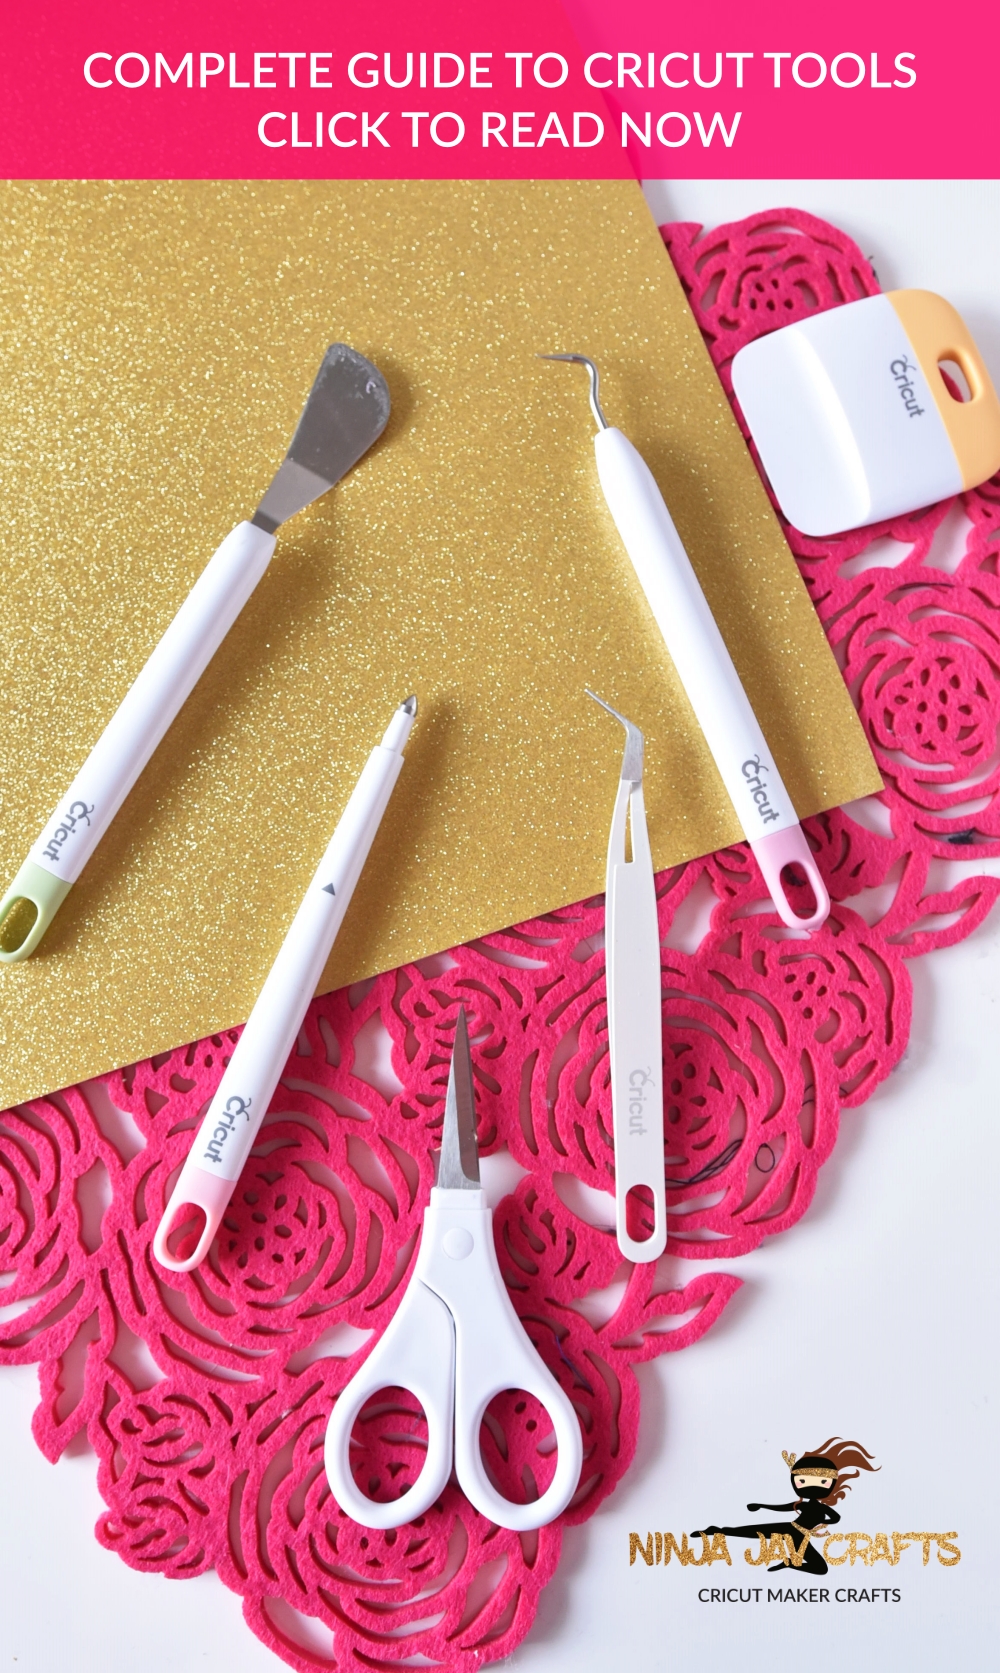 In this post, you'll learn everything you need to know about the essential Cricut Tools. Find out what all tools you will need when starting out and what's the function of each of the tools.